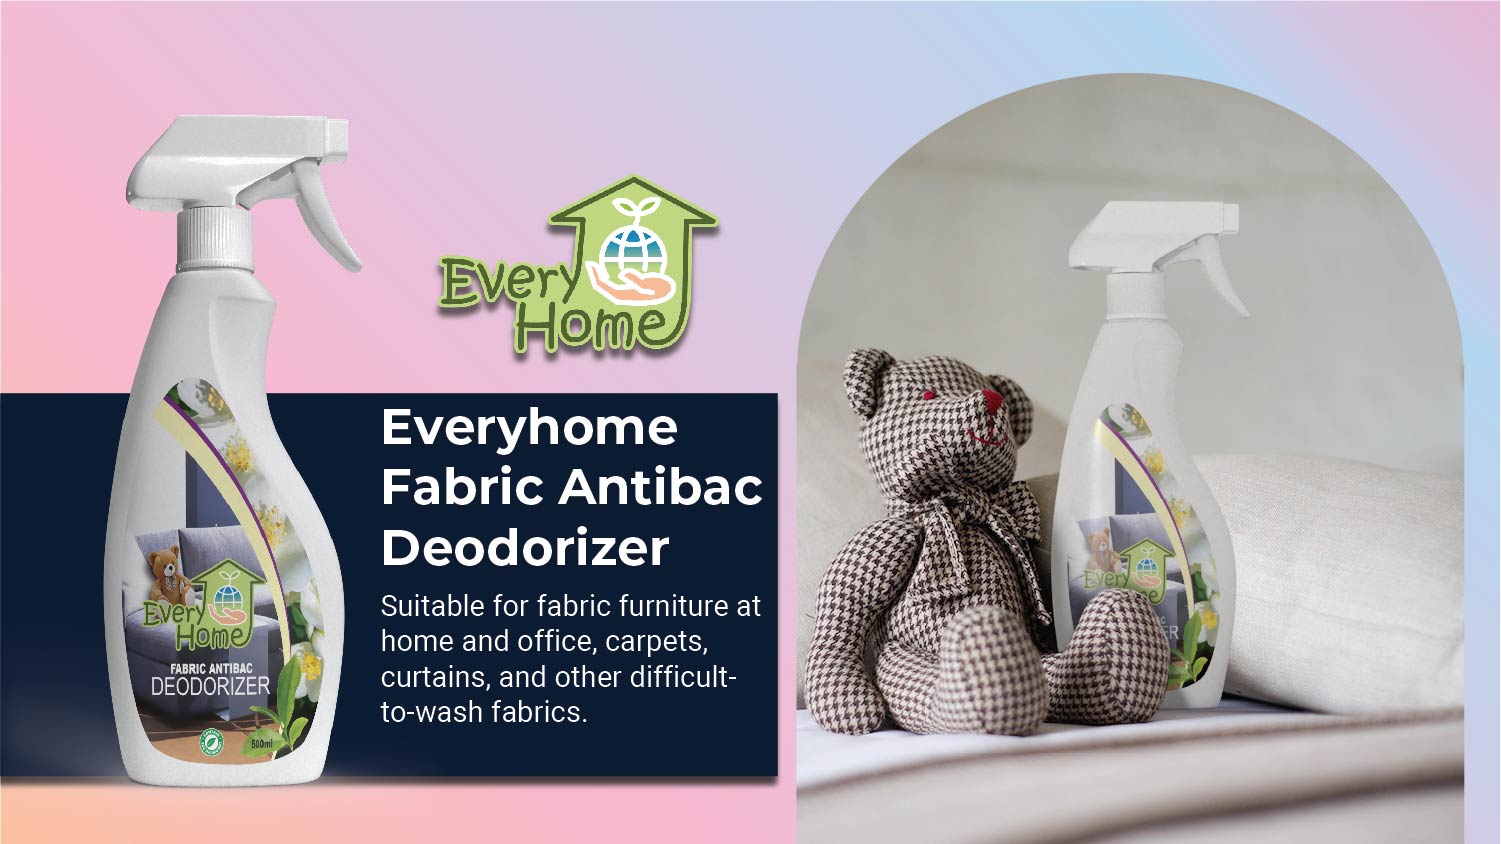 everyhome product details